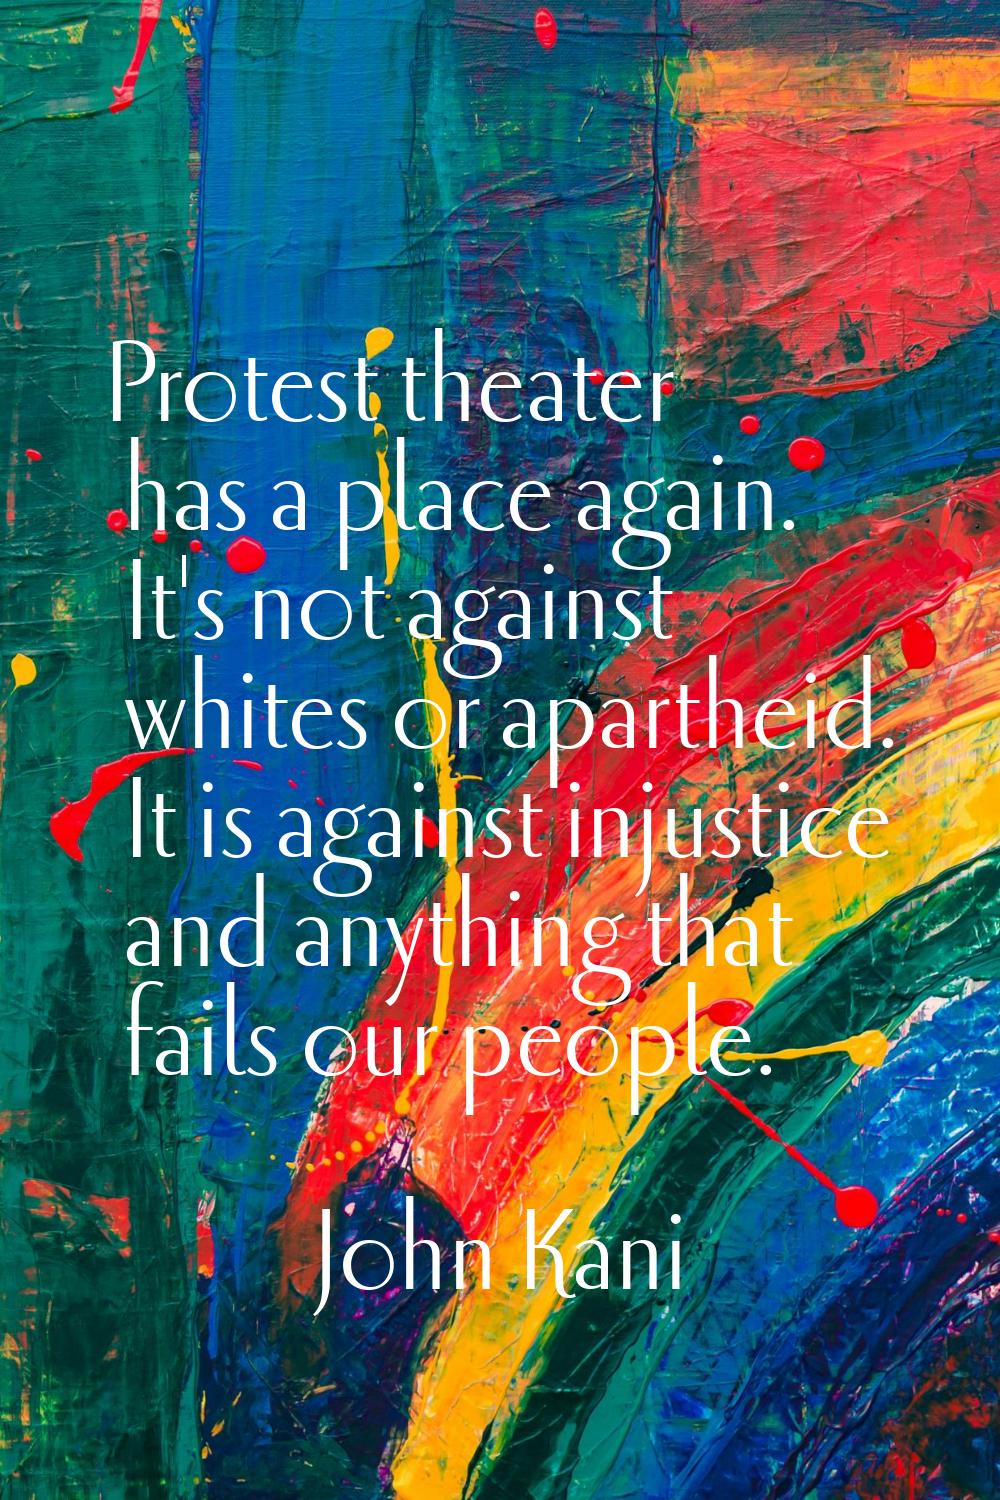 Protest theater has a place again. It's not against whites or apartheid. It is against injustice an